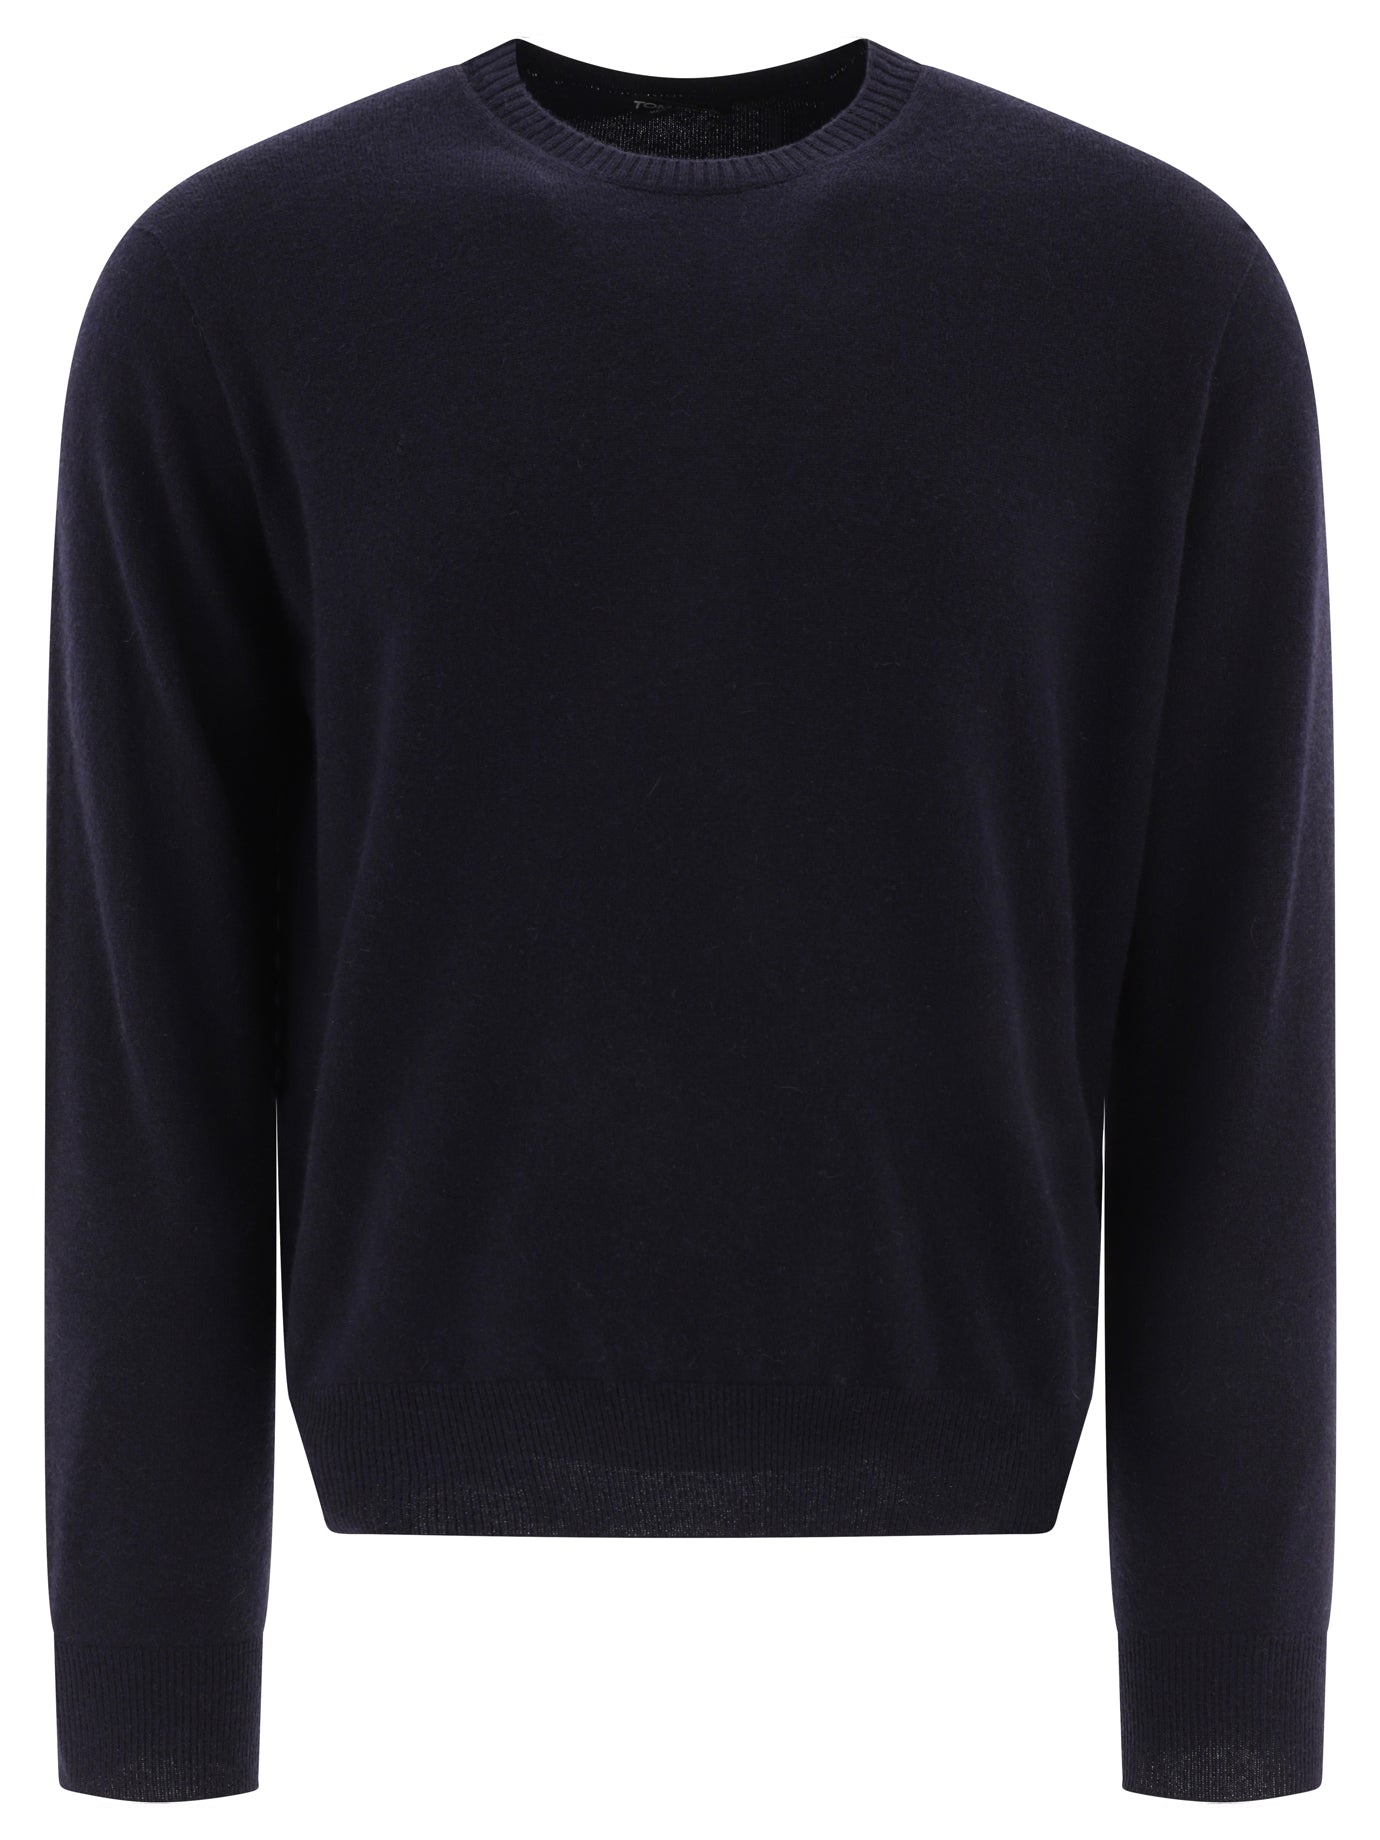 Tom Ford Cashmere Crewneck Sweater Knitwear Blue In Black